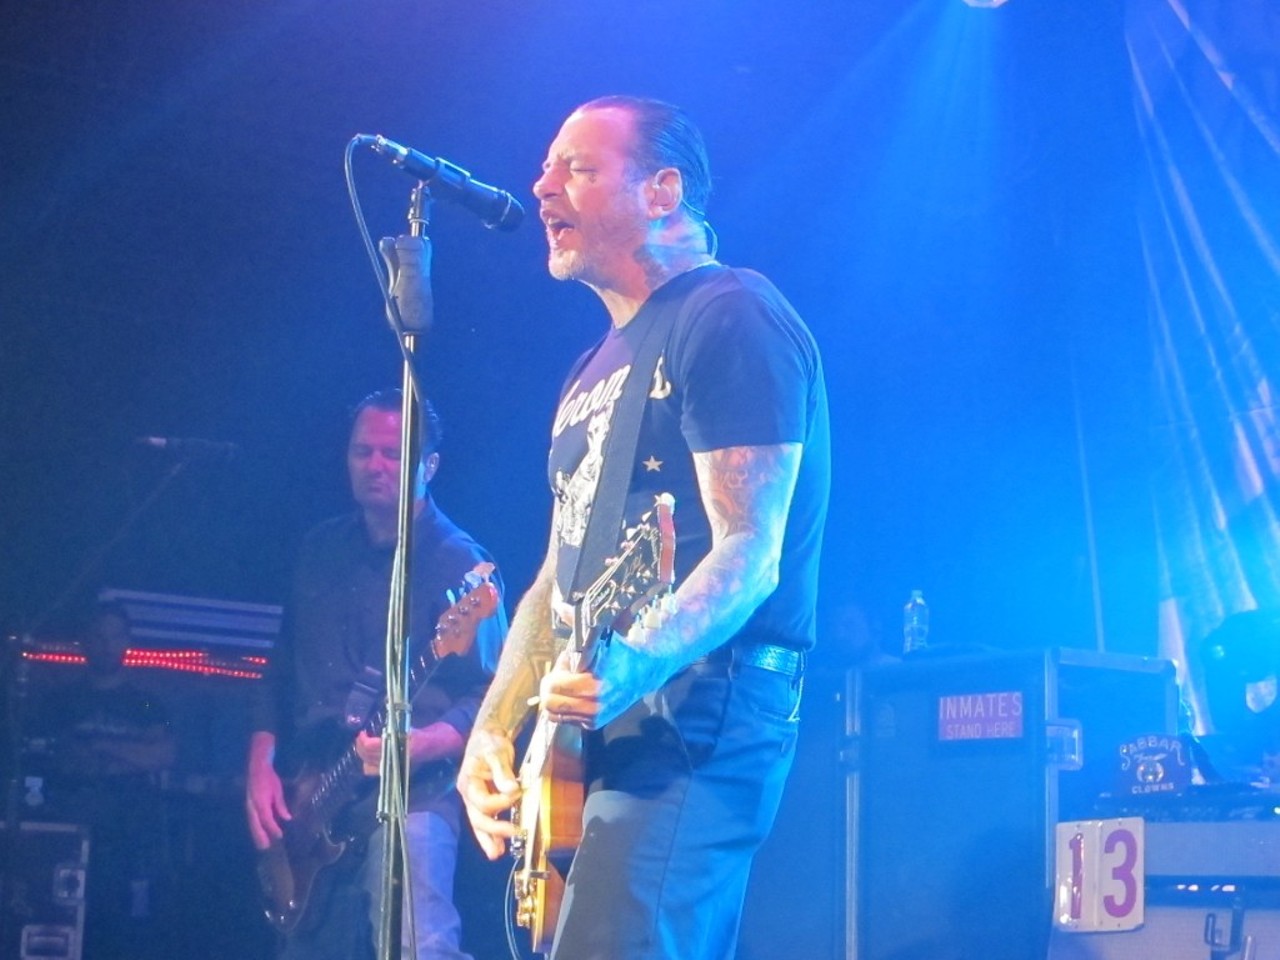 Ring of fire at Social Distortion at HOB, photo by Jeff Niesel.